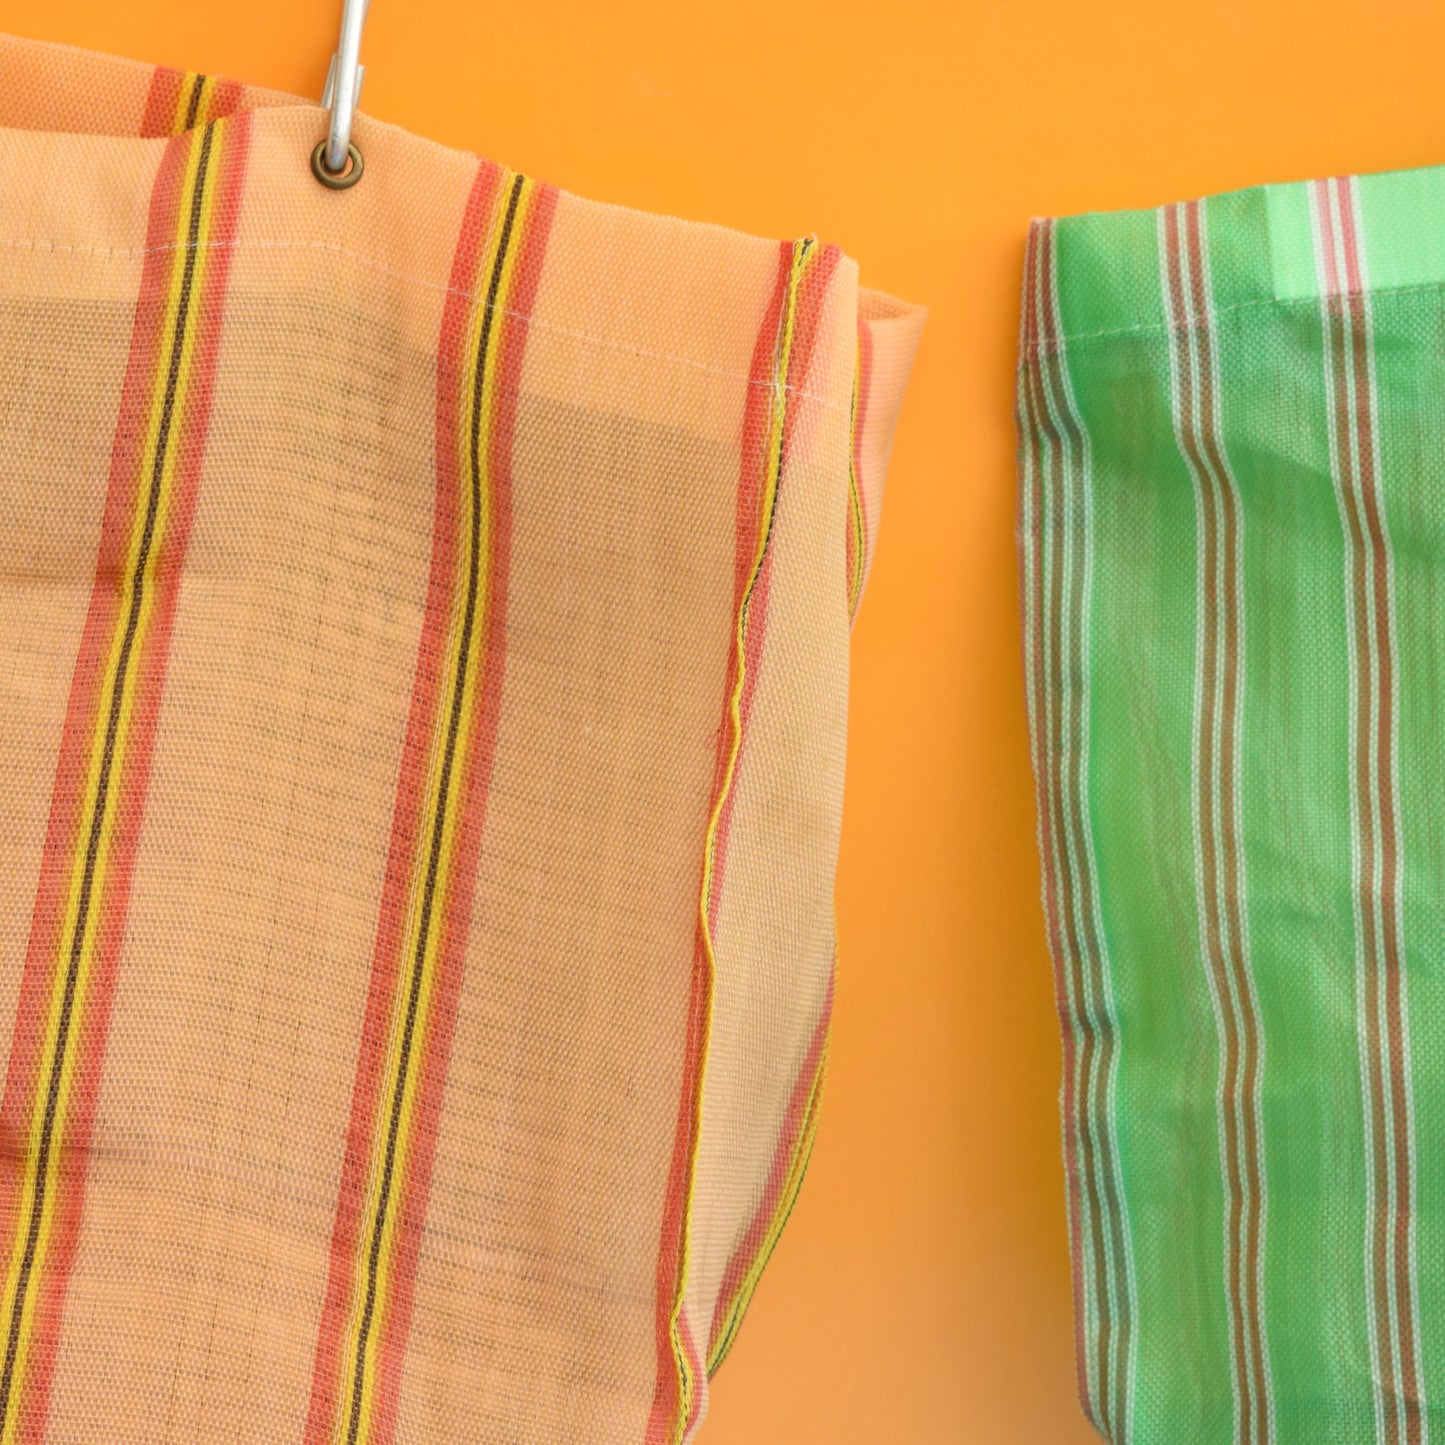 Vintage 1960s Woven Shopping Bags